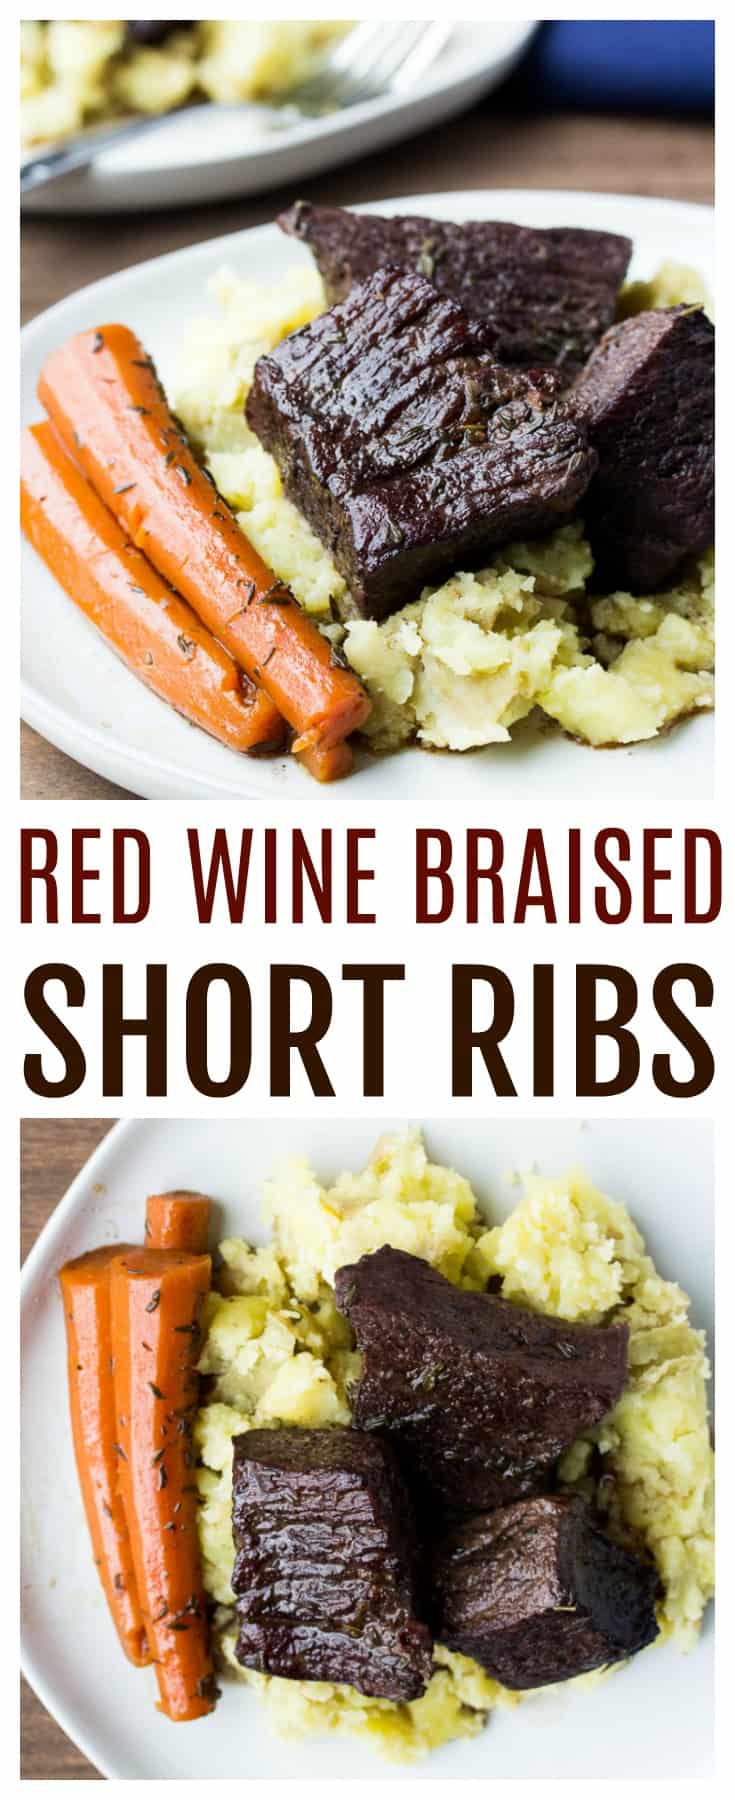 Red Wine Braised Short Ribs are an easy, yet impressive dinner! These beef ribs will be fall-apart tender and the red wine sauce is so rich and flavorful. This recipe is best when slow cooked in the oven, so be sure to plan ahead. | #dlbrecipes #shortribs #beef #beefshortribs #redwinebraisedshortribs